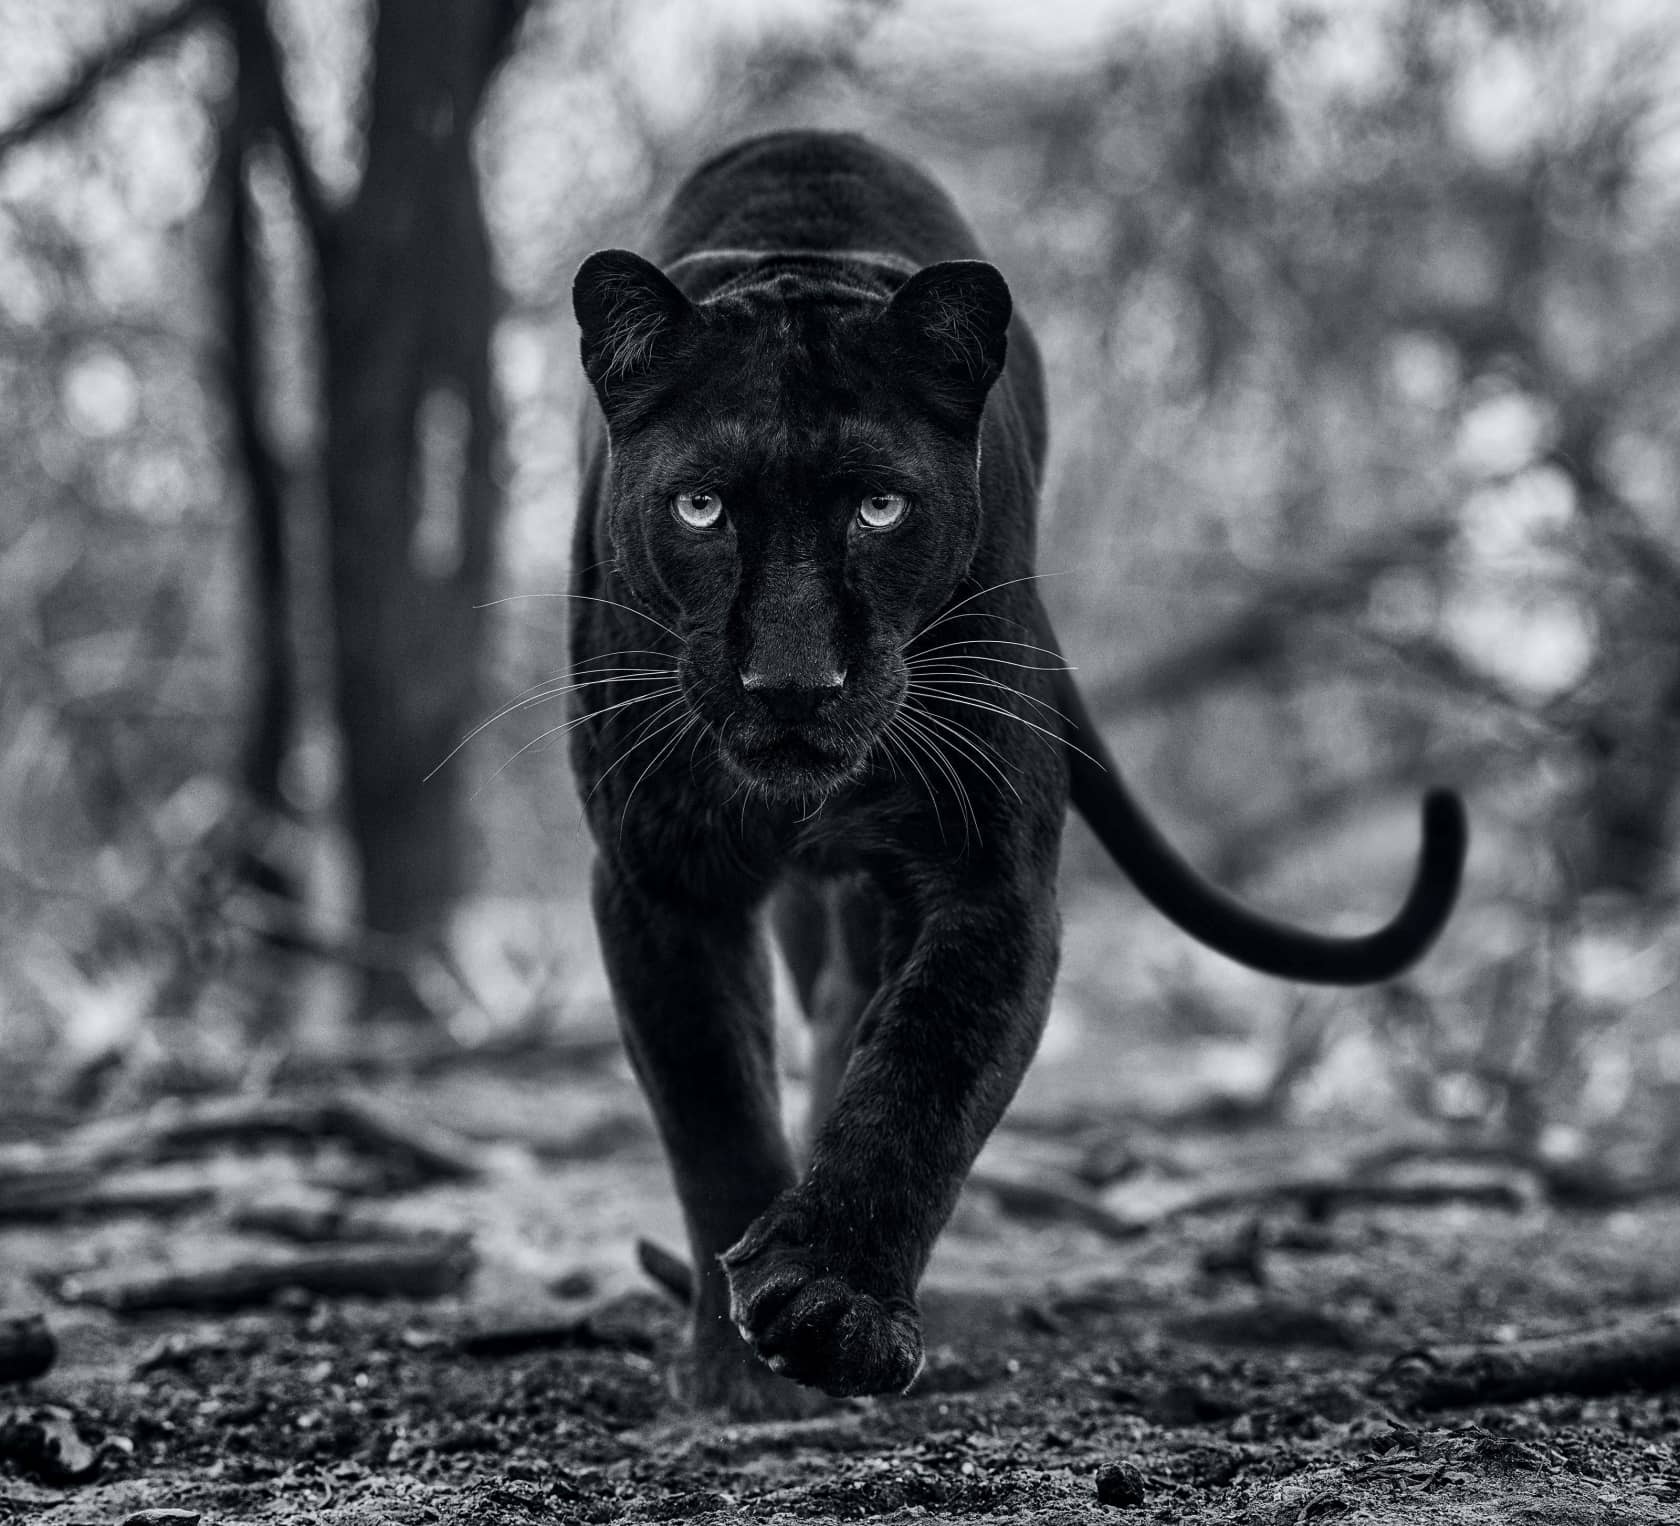 David Yarrow, Remains of the Day, 2021